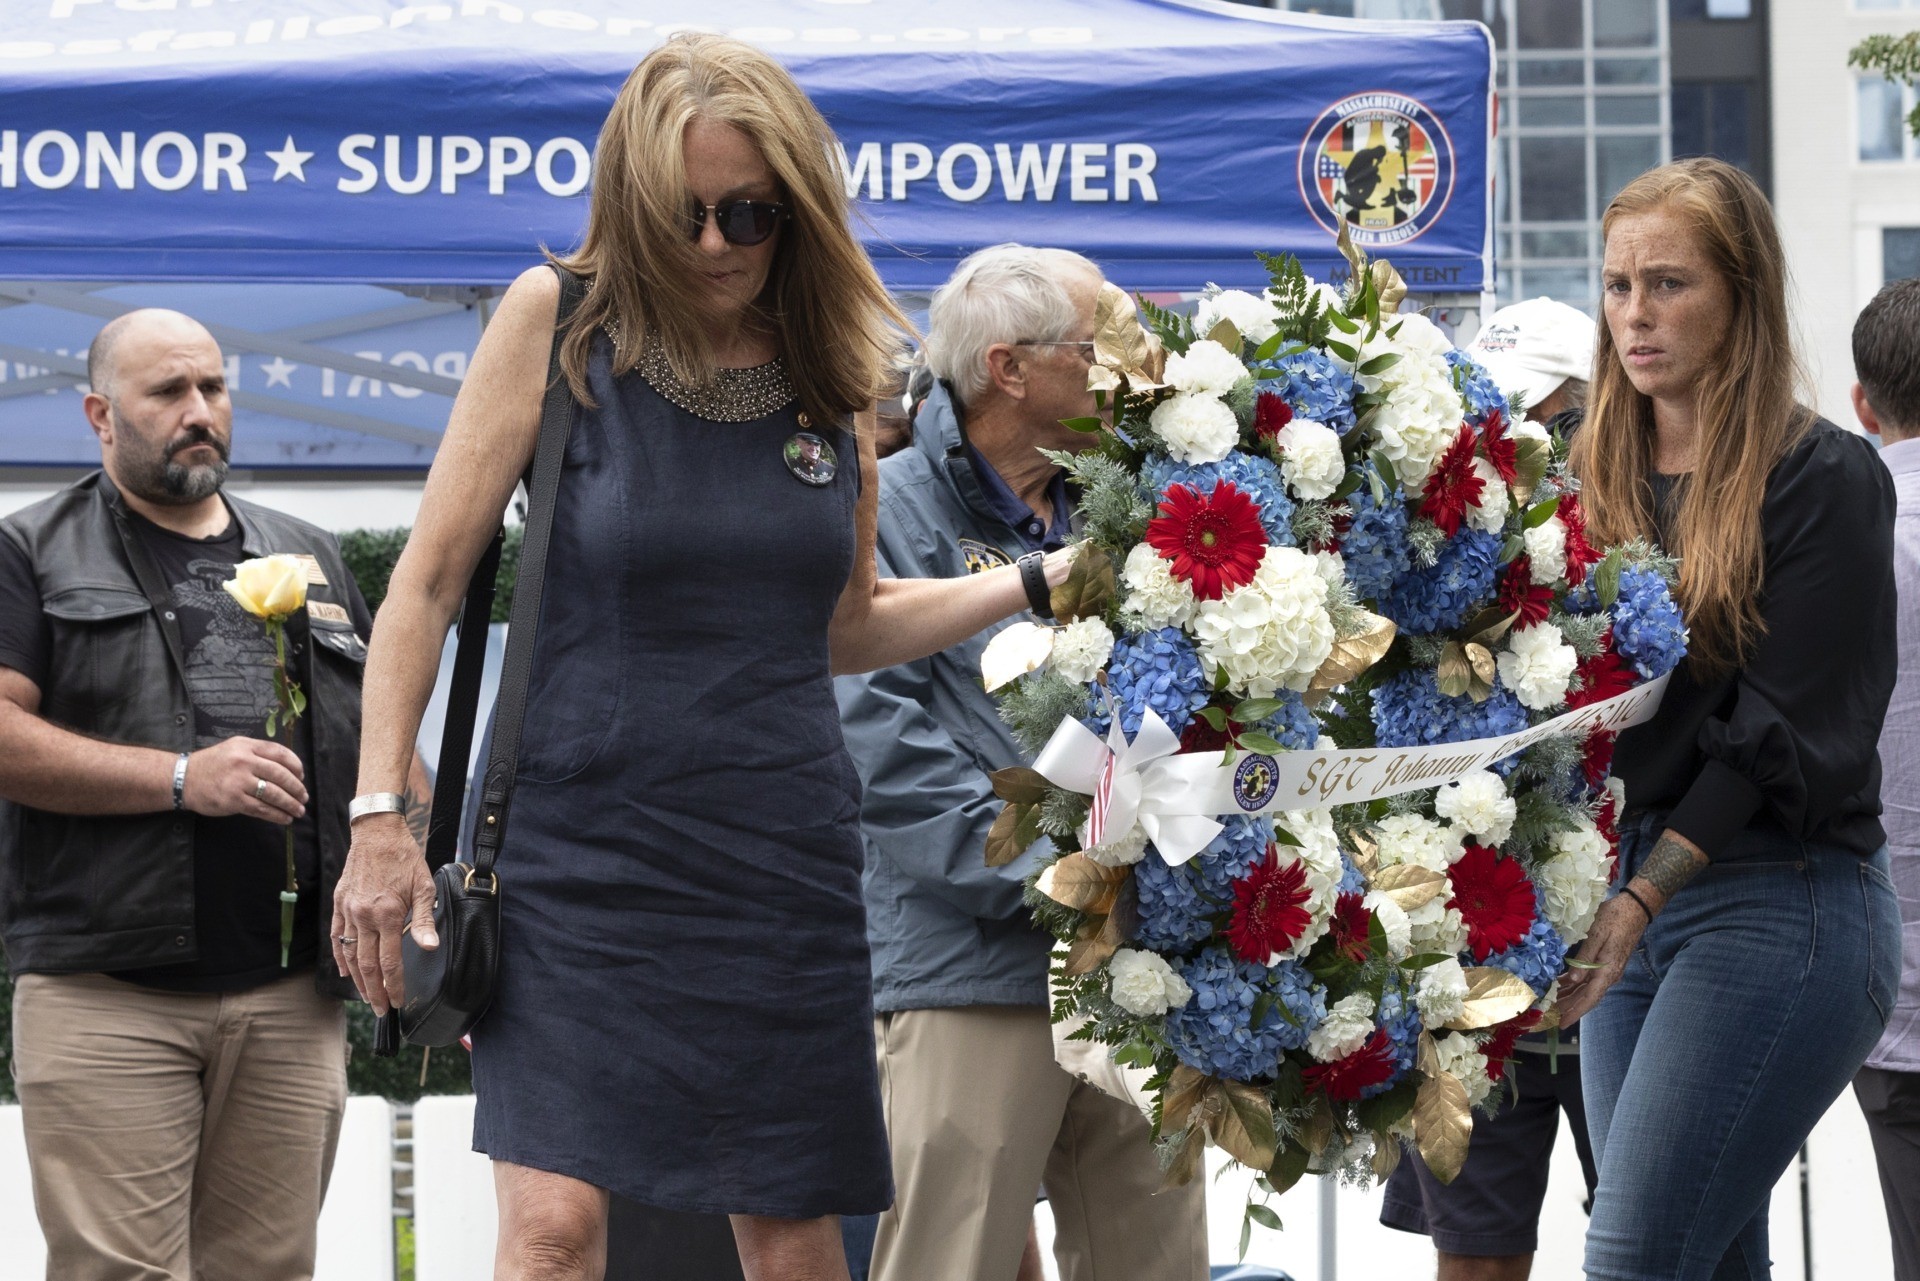 Mary Ellen Callahan, left, and Kelsey Powers, right, carry a wreath in memory of Marine Sgt. Johanny Rosario Pichardo, from Lawrence, Mass., during a ceremony at the Massachusetts Fallen Heroes Memorial, Saturday, Aug. 28, 2021, in Boston. The ceremony was held to honor the U.S. service members killed in a suicide bombing at the airport in Kabul, Afghanistan, including Rosario. (AP Photo/Michael Dwyer)